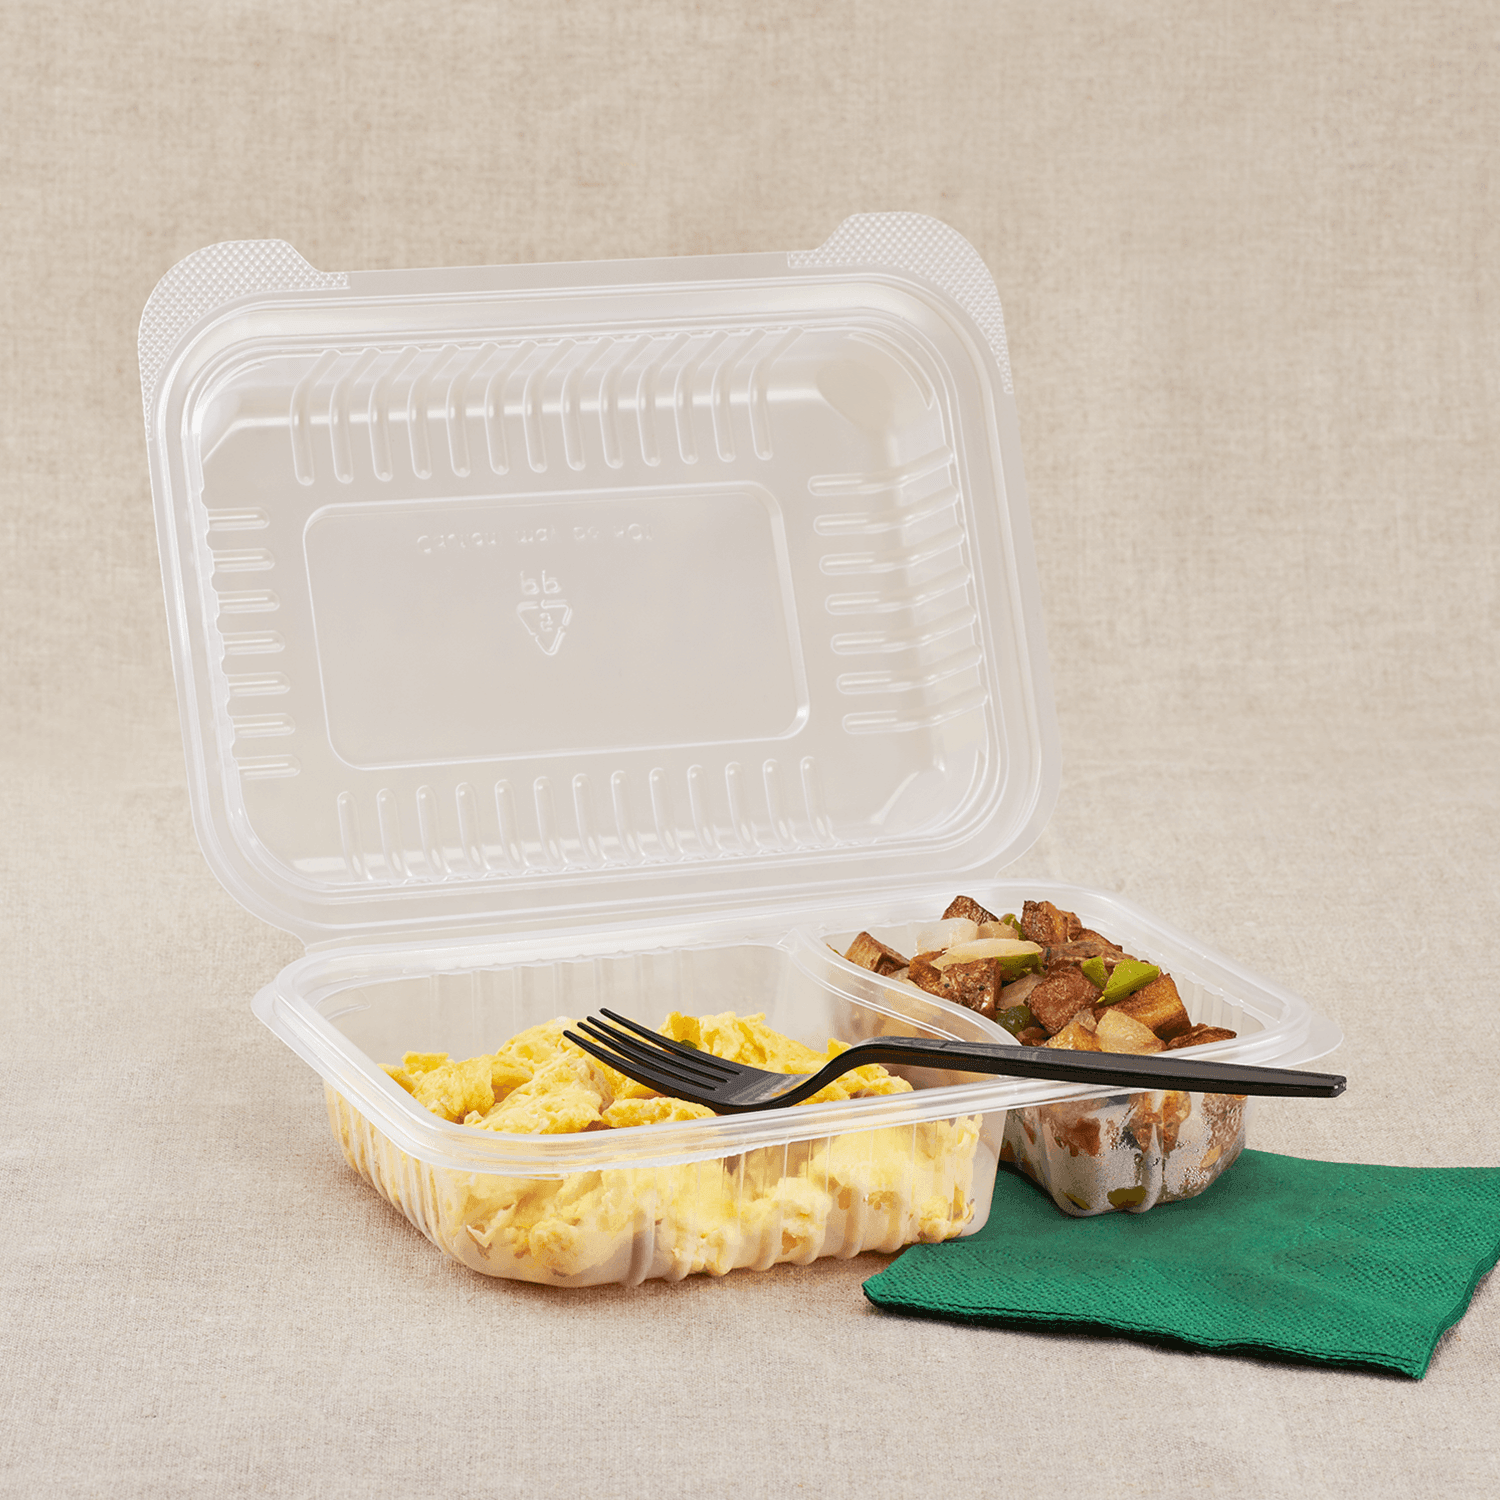 Karat 9'' x 6" PP Plastic Hinged Containers with 2 Compartments and food inside